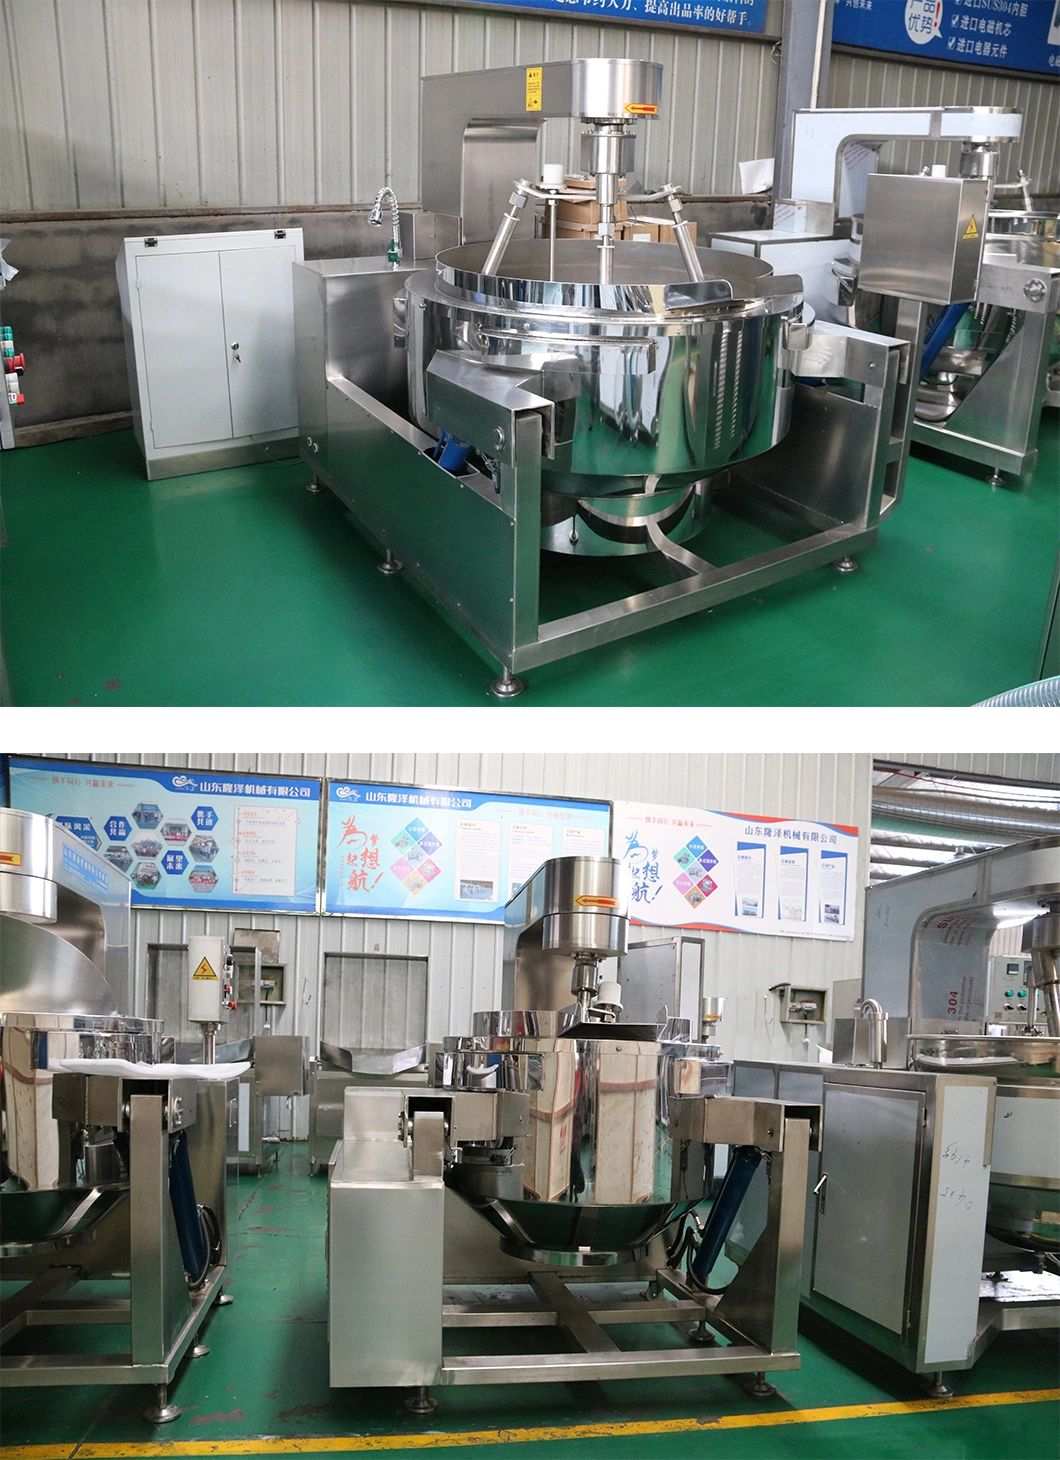 China Big Industrial Commercial Automatic Multi Planetary Tilting Curry Chili Bean Paste Mixing Making Electric Gas Steam Chipotle Sauce Cook Wok